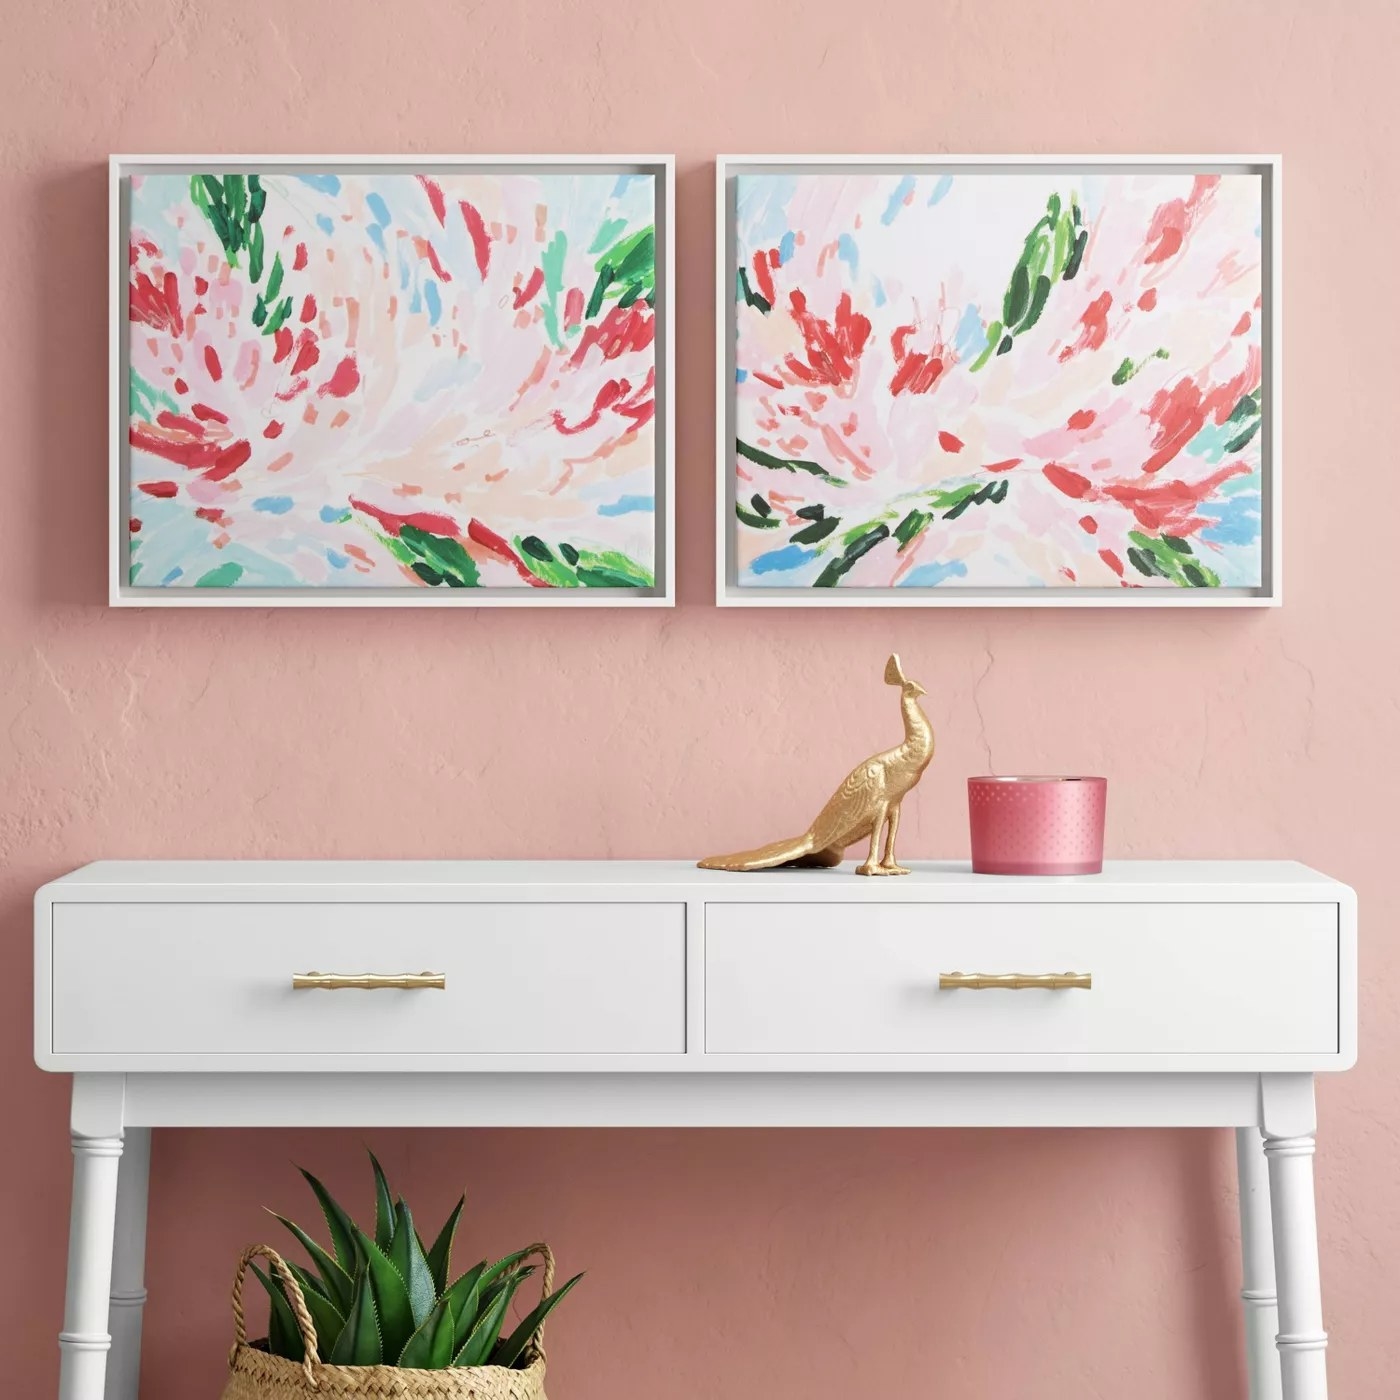 The abstract flower paintings in white frames